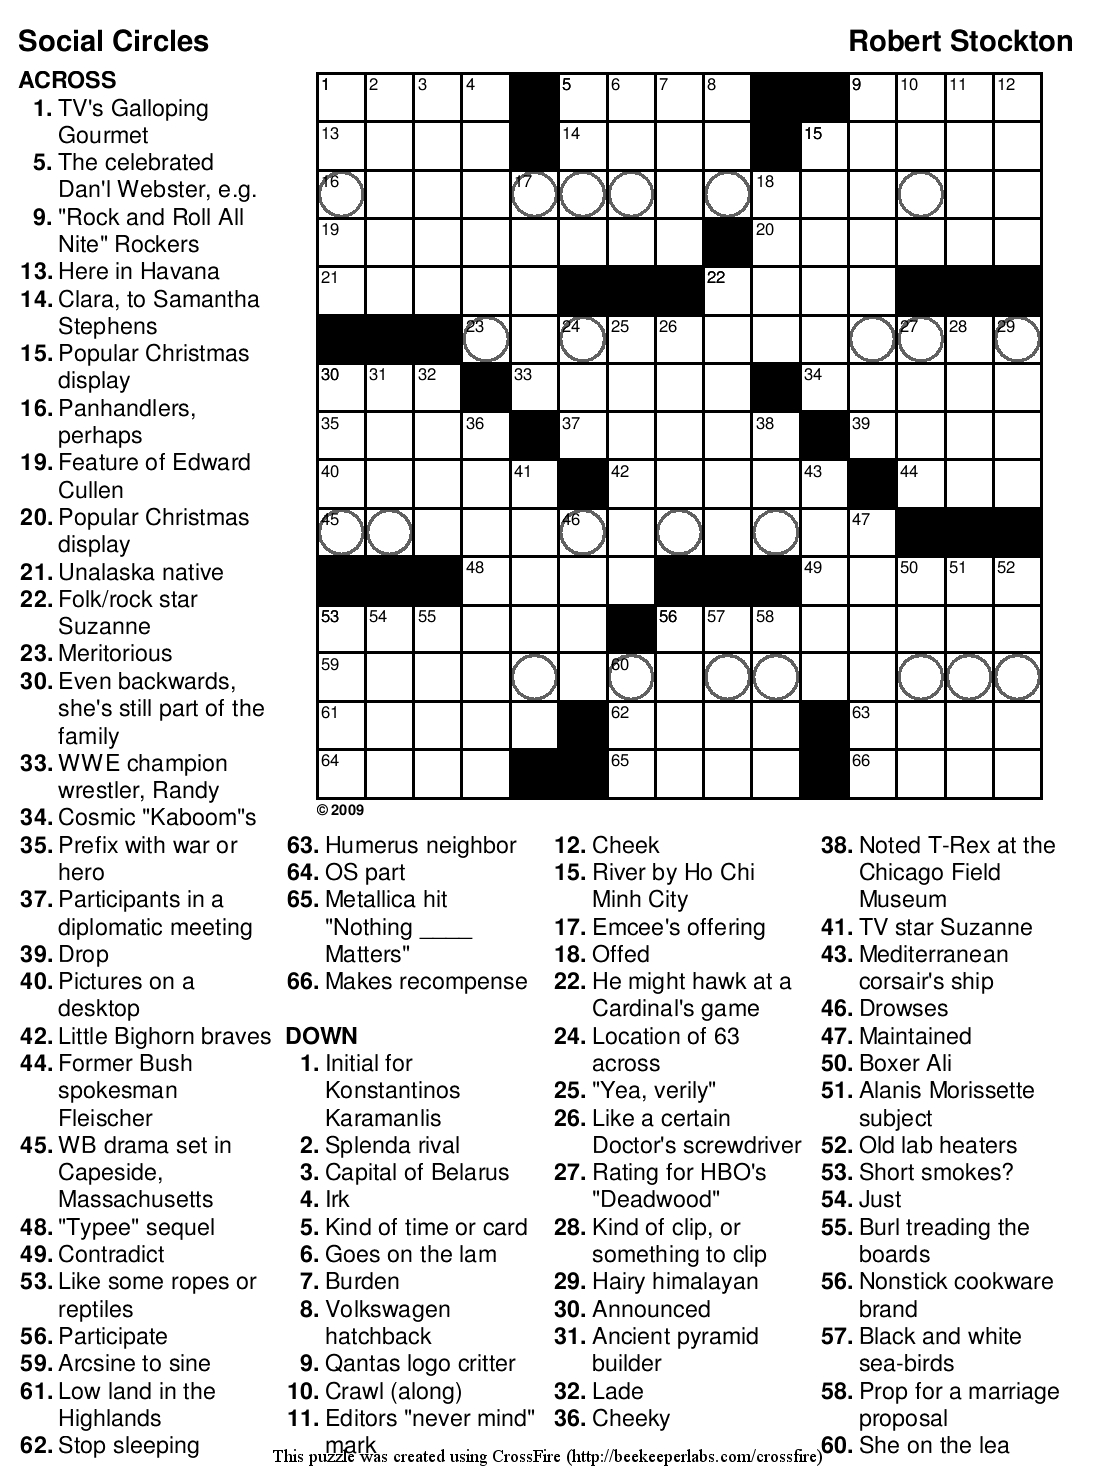 Crossword Puzzles Printable - Yahoo Image Search Results | Crossword - Printable Crossword Puzzles Online